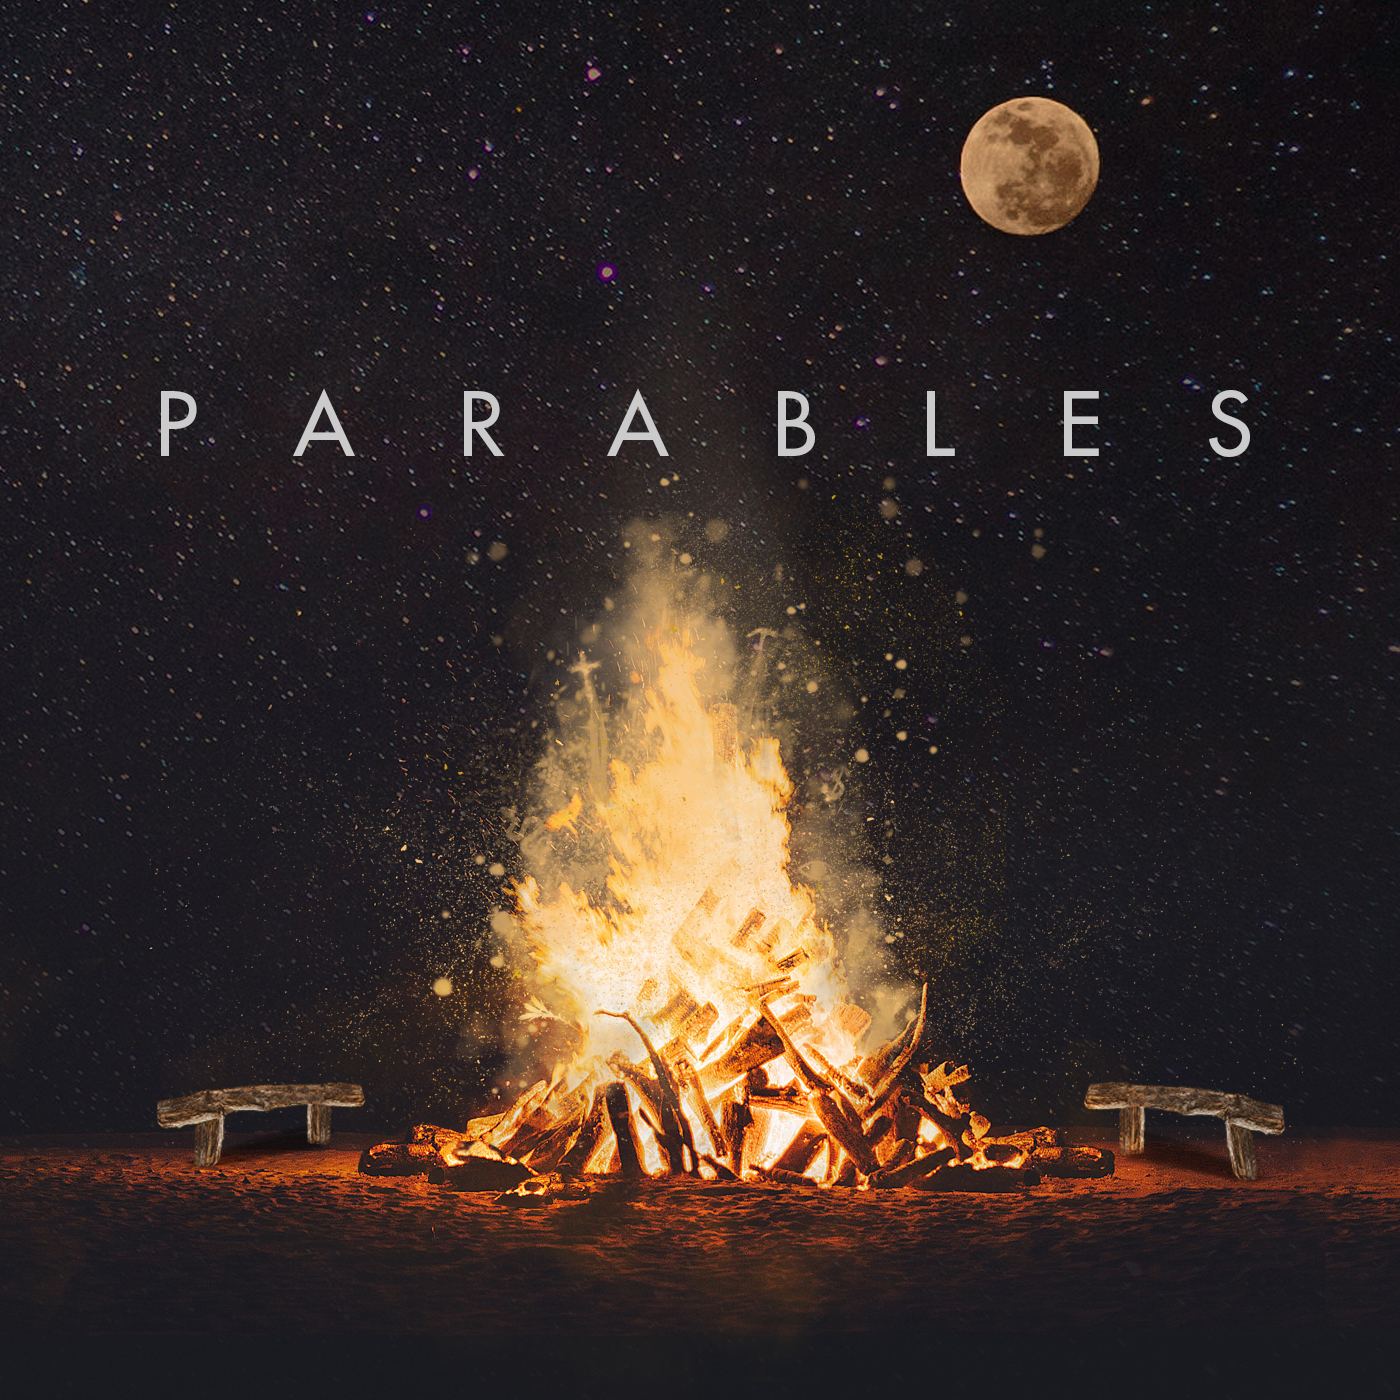 Parables - The Lord&#39;s Supper - Chris Wall - 12-1-2019